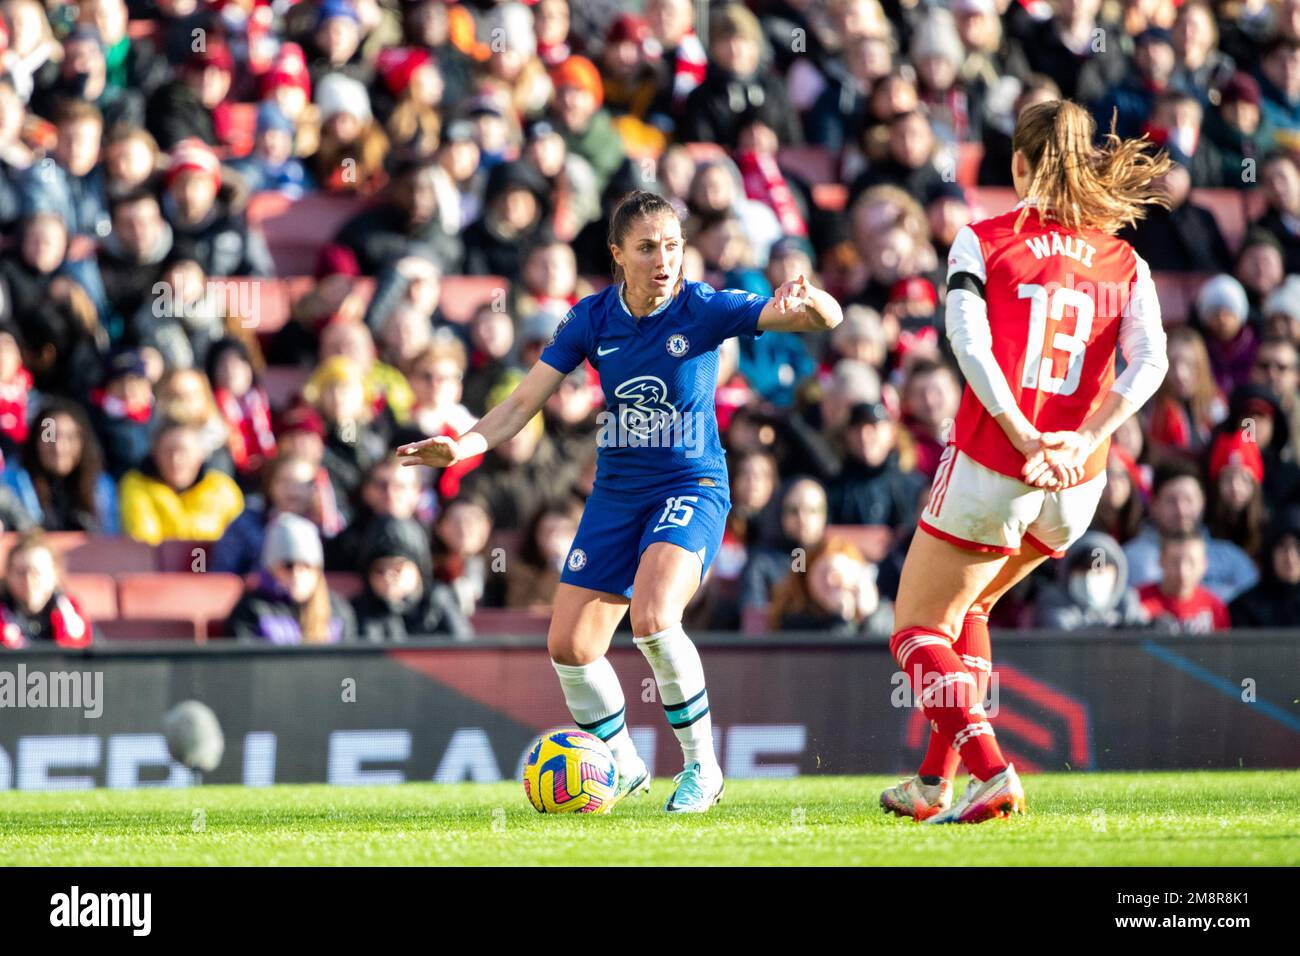 London, UK. 15th Jan, 2023. Eve Perisset (15 Chelsea) in action during the Barclays FA Womens Super League game between Arsenal and Chelsea at Emirates Stadium in London, England. (Liam Asman/SPP) Credit: SPP Sport Press Photo. /Alamy Live News Stock Photo